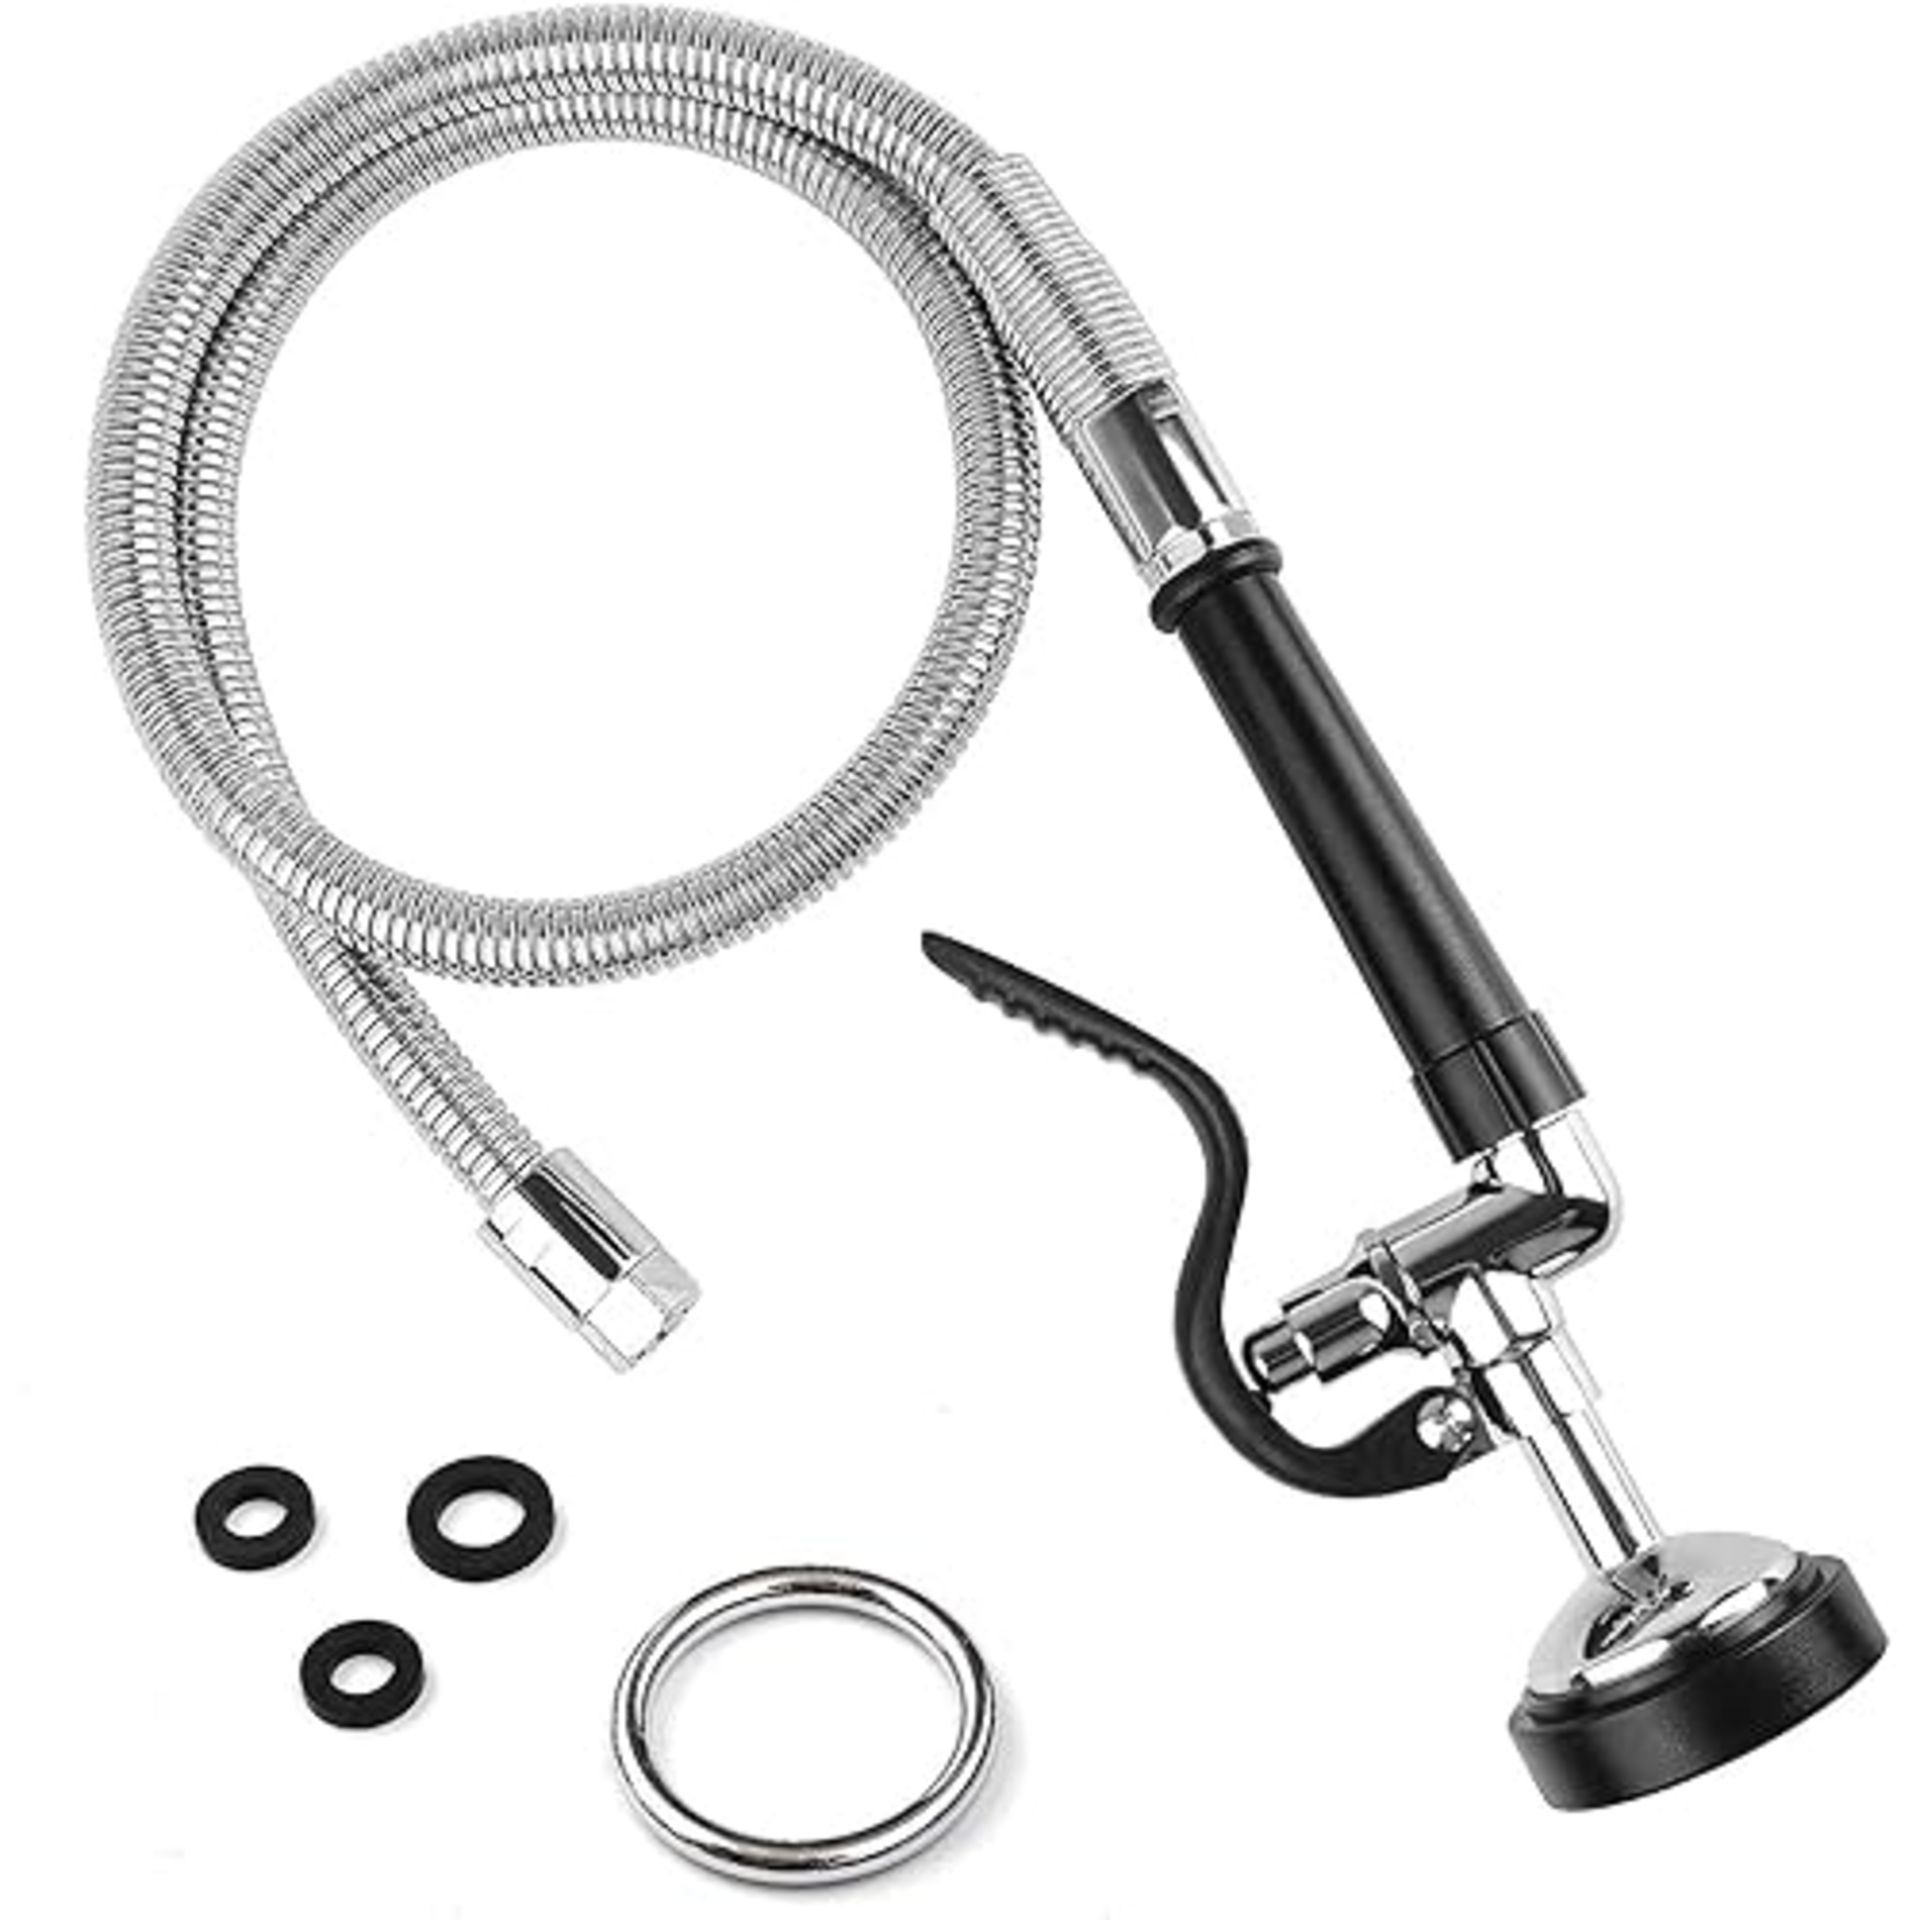 Pre-Rinse Replacement Kit - High Pressure Spray Head and Stainless Steel Hose Connection for Commer